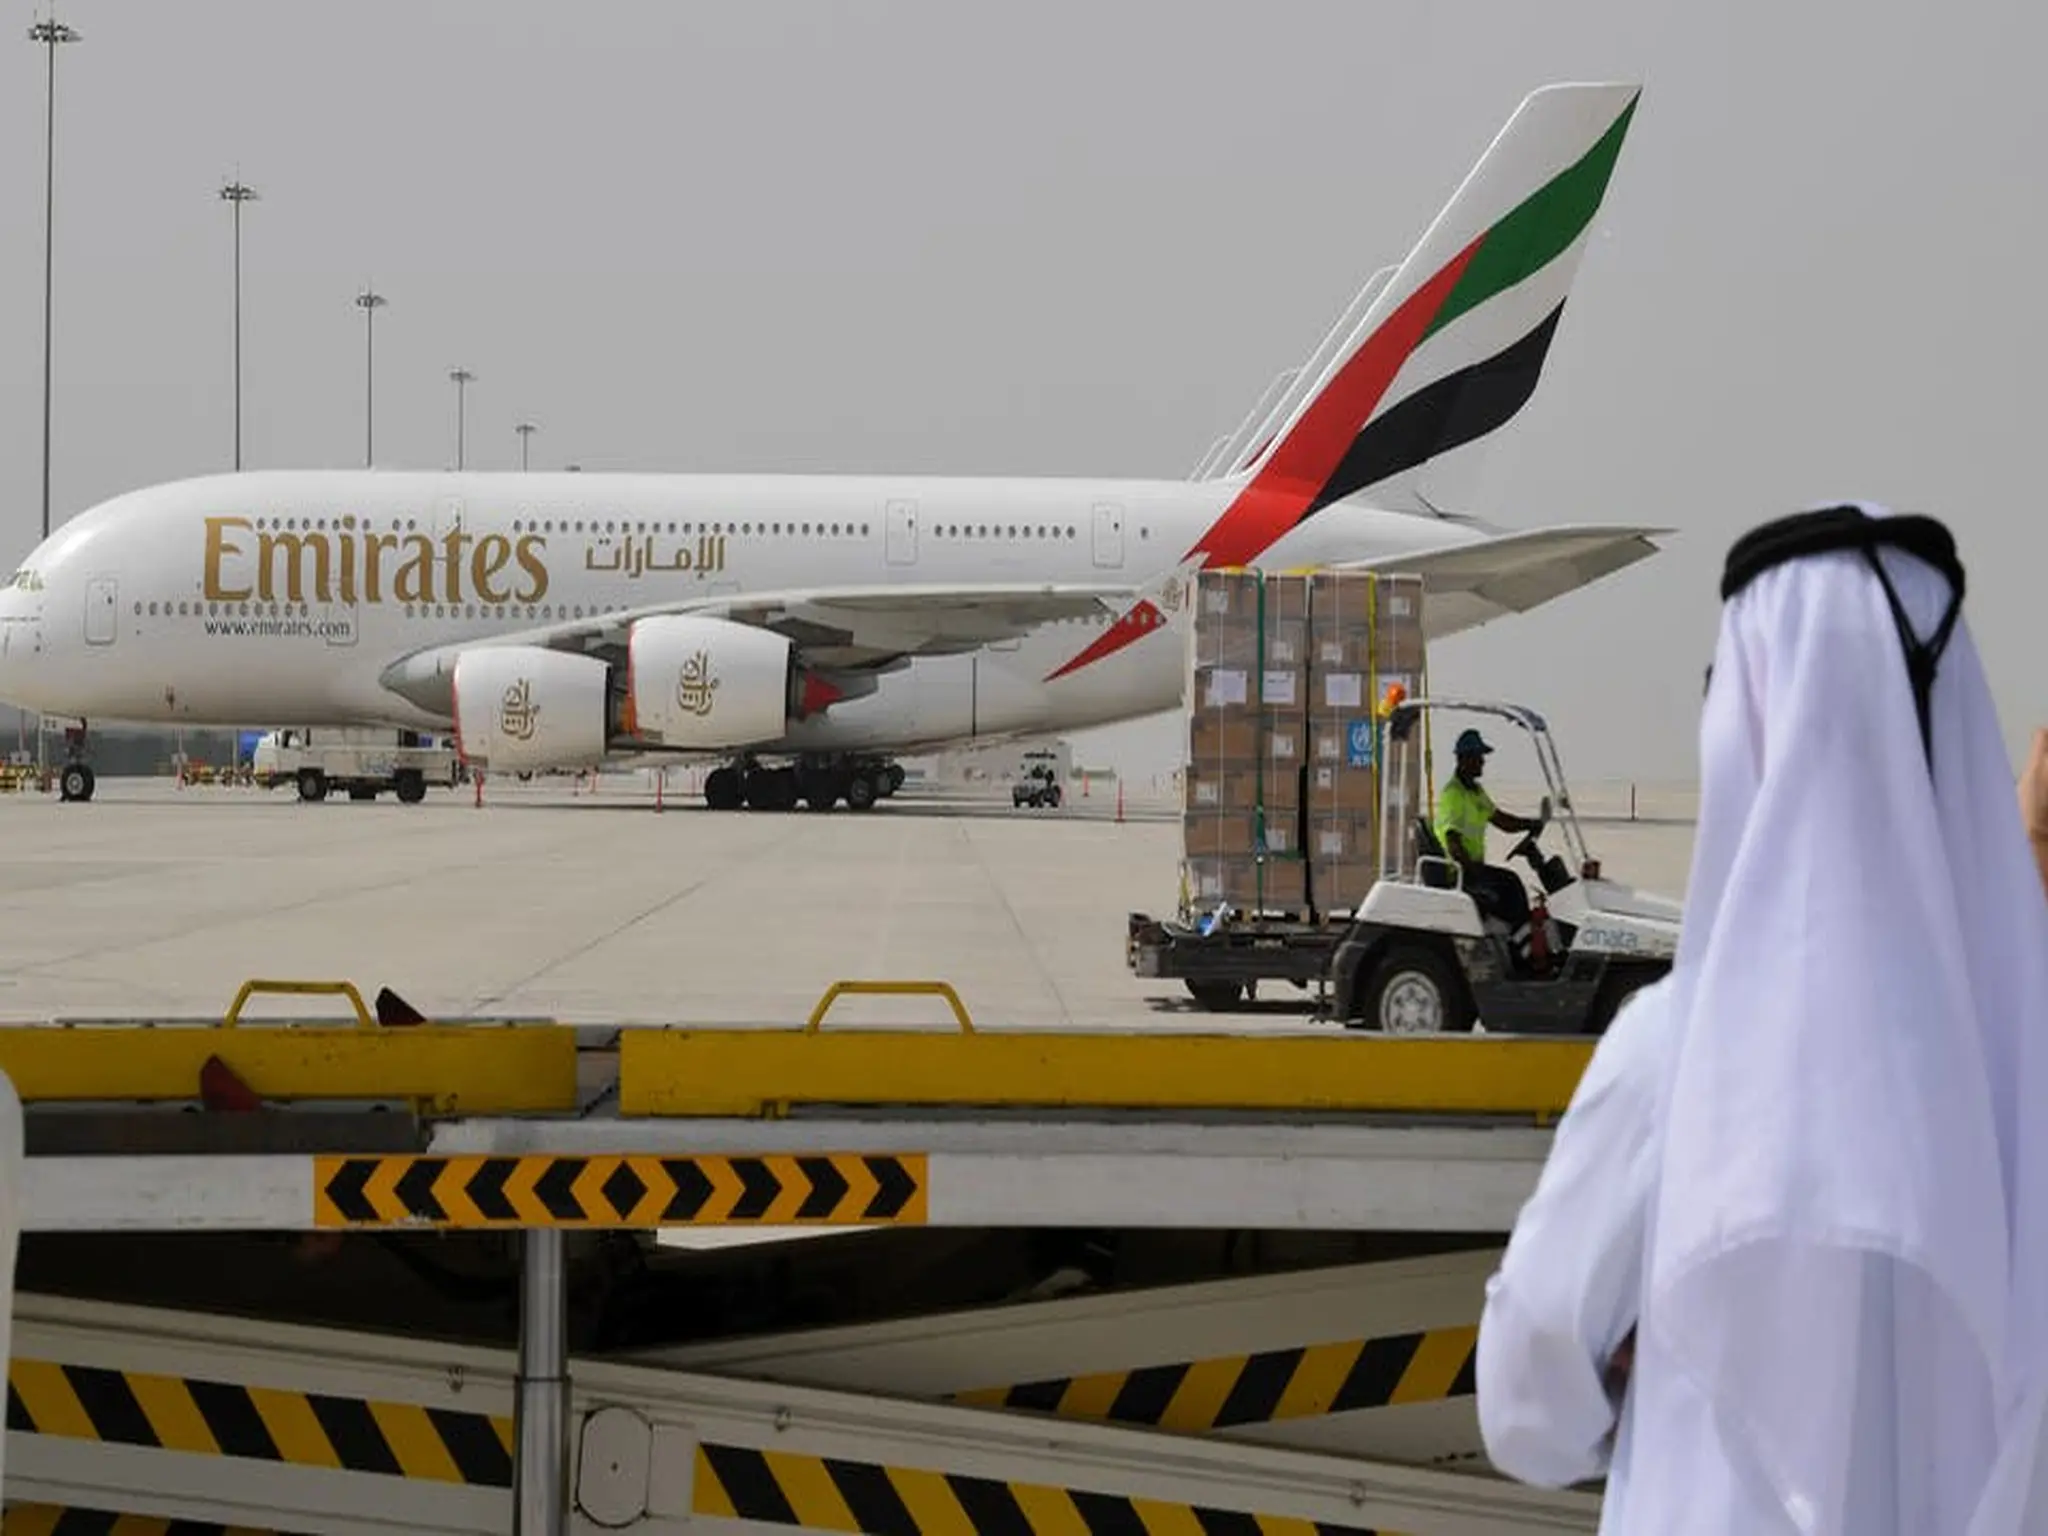 Emirates Airlines gives free services to all travelers by its flights